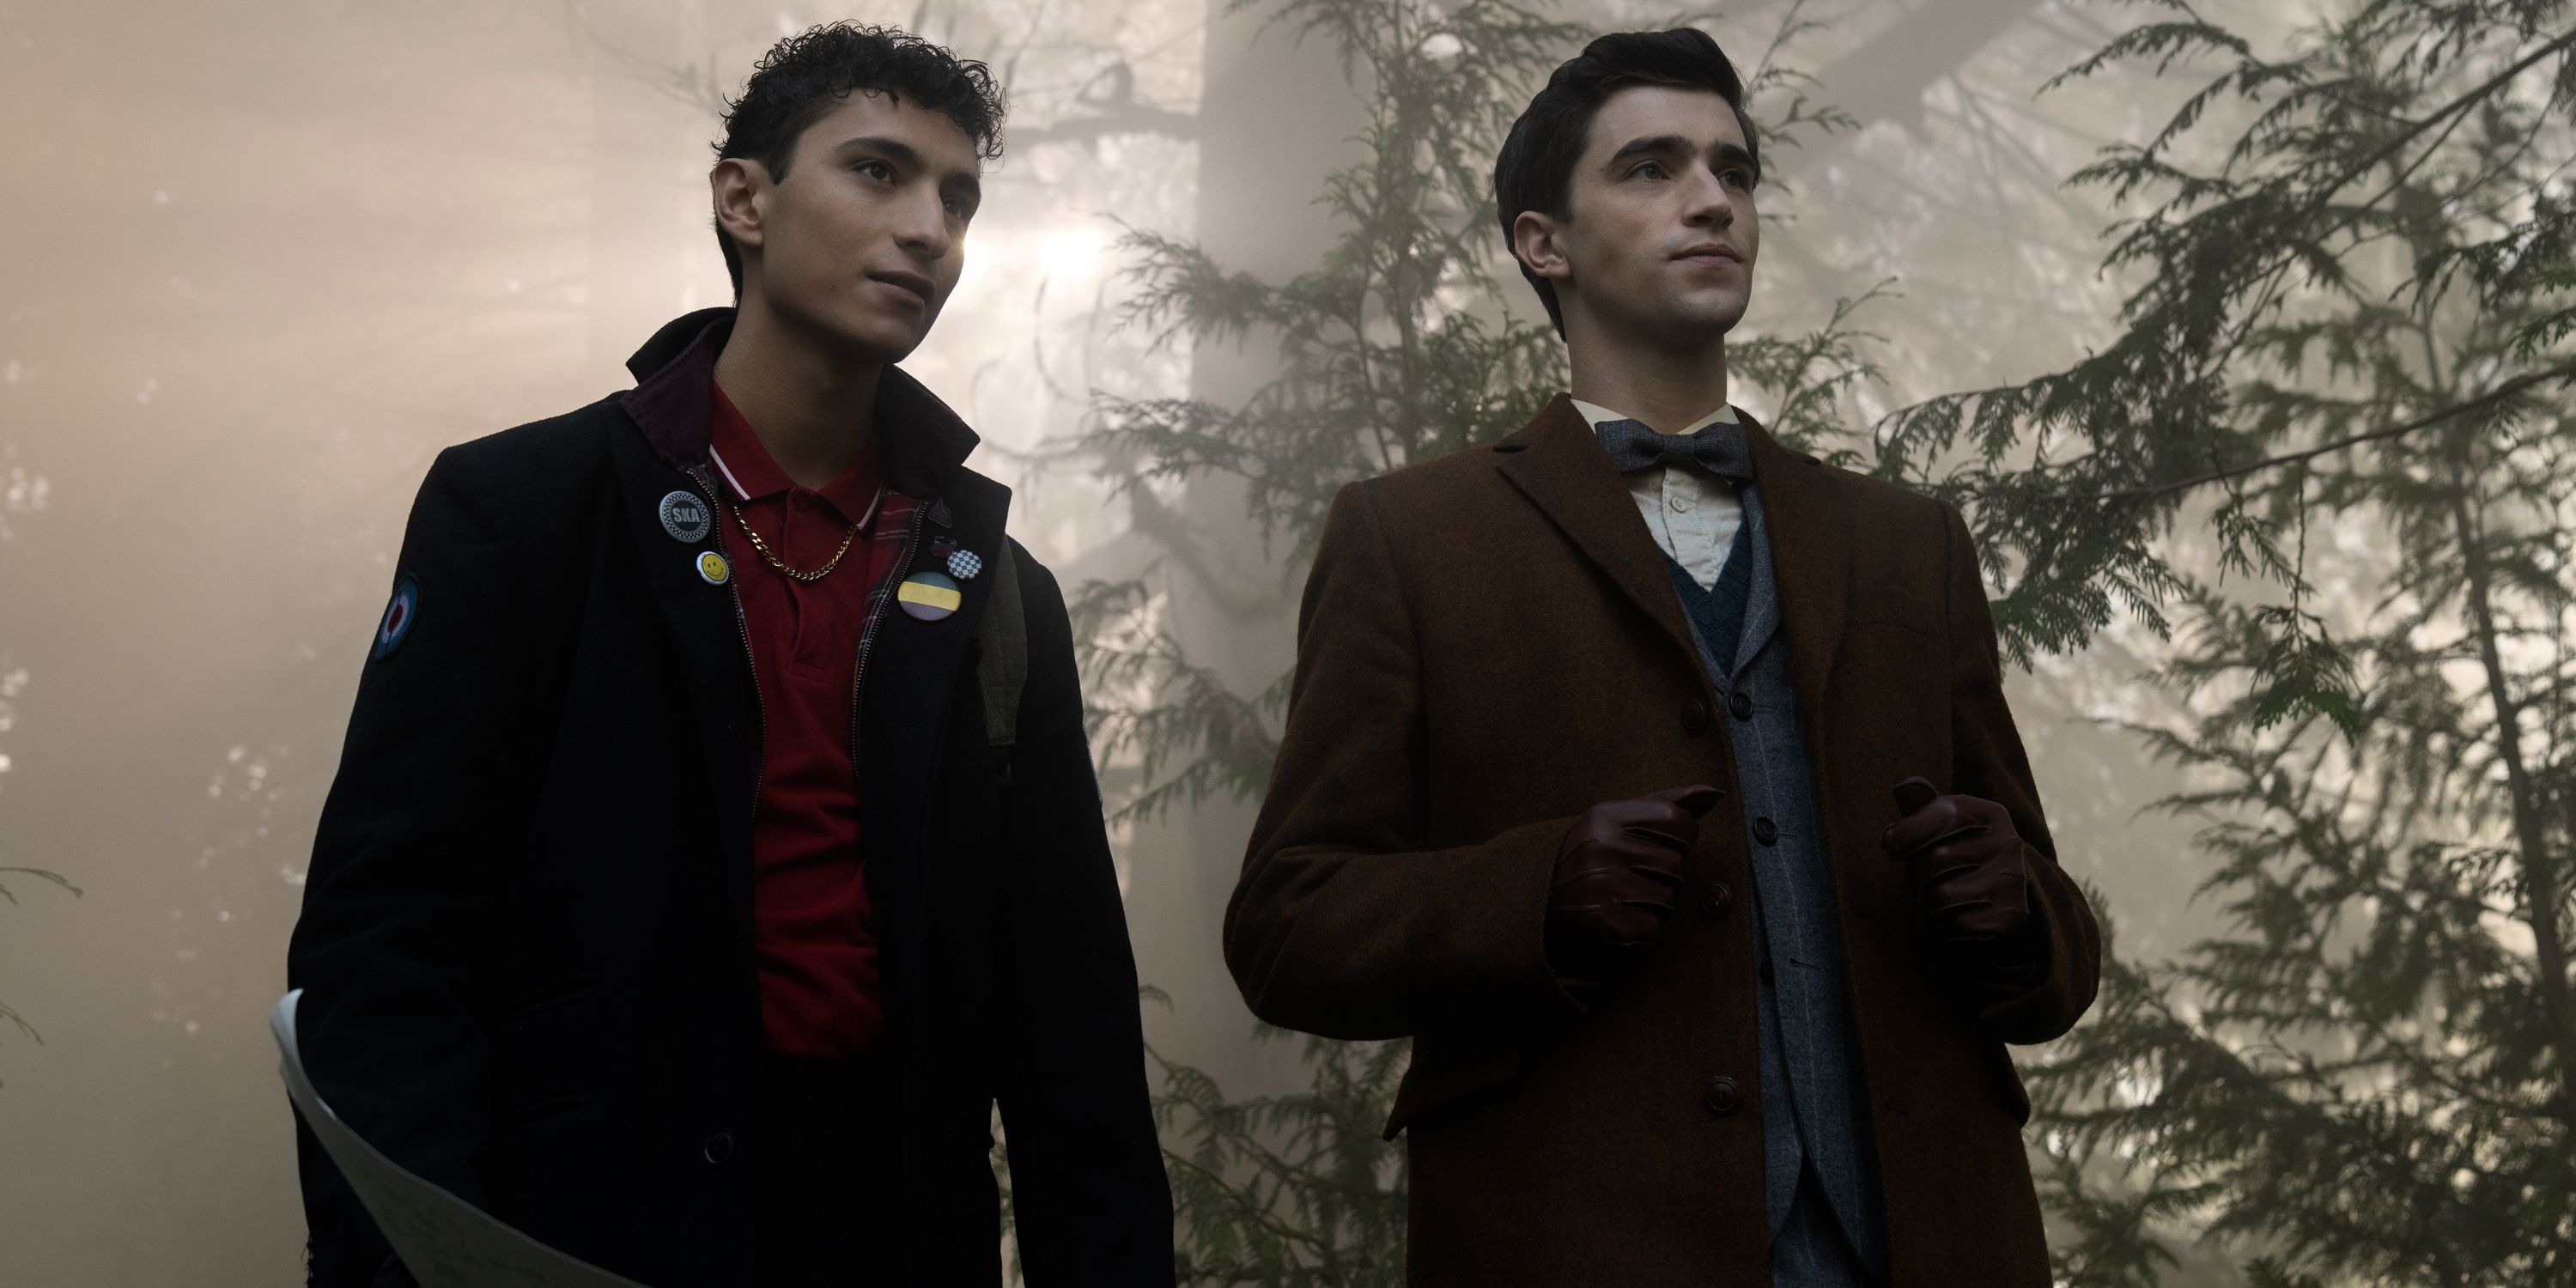 George Rexstrew as Edwin and Jayden Revri as Charles standing together in the forest in Dead Boy Detectives